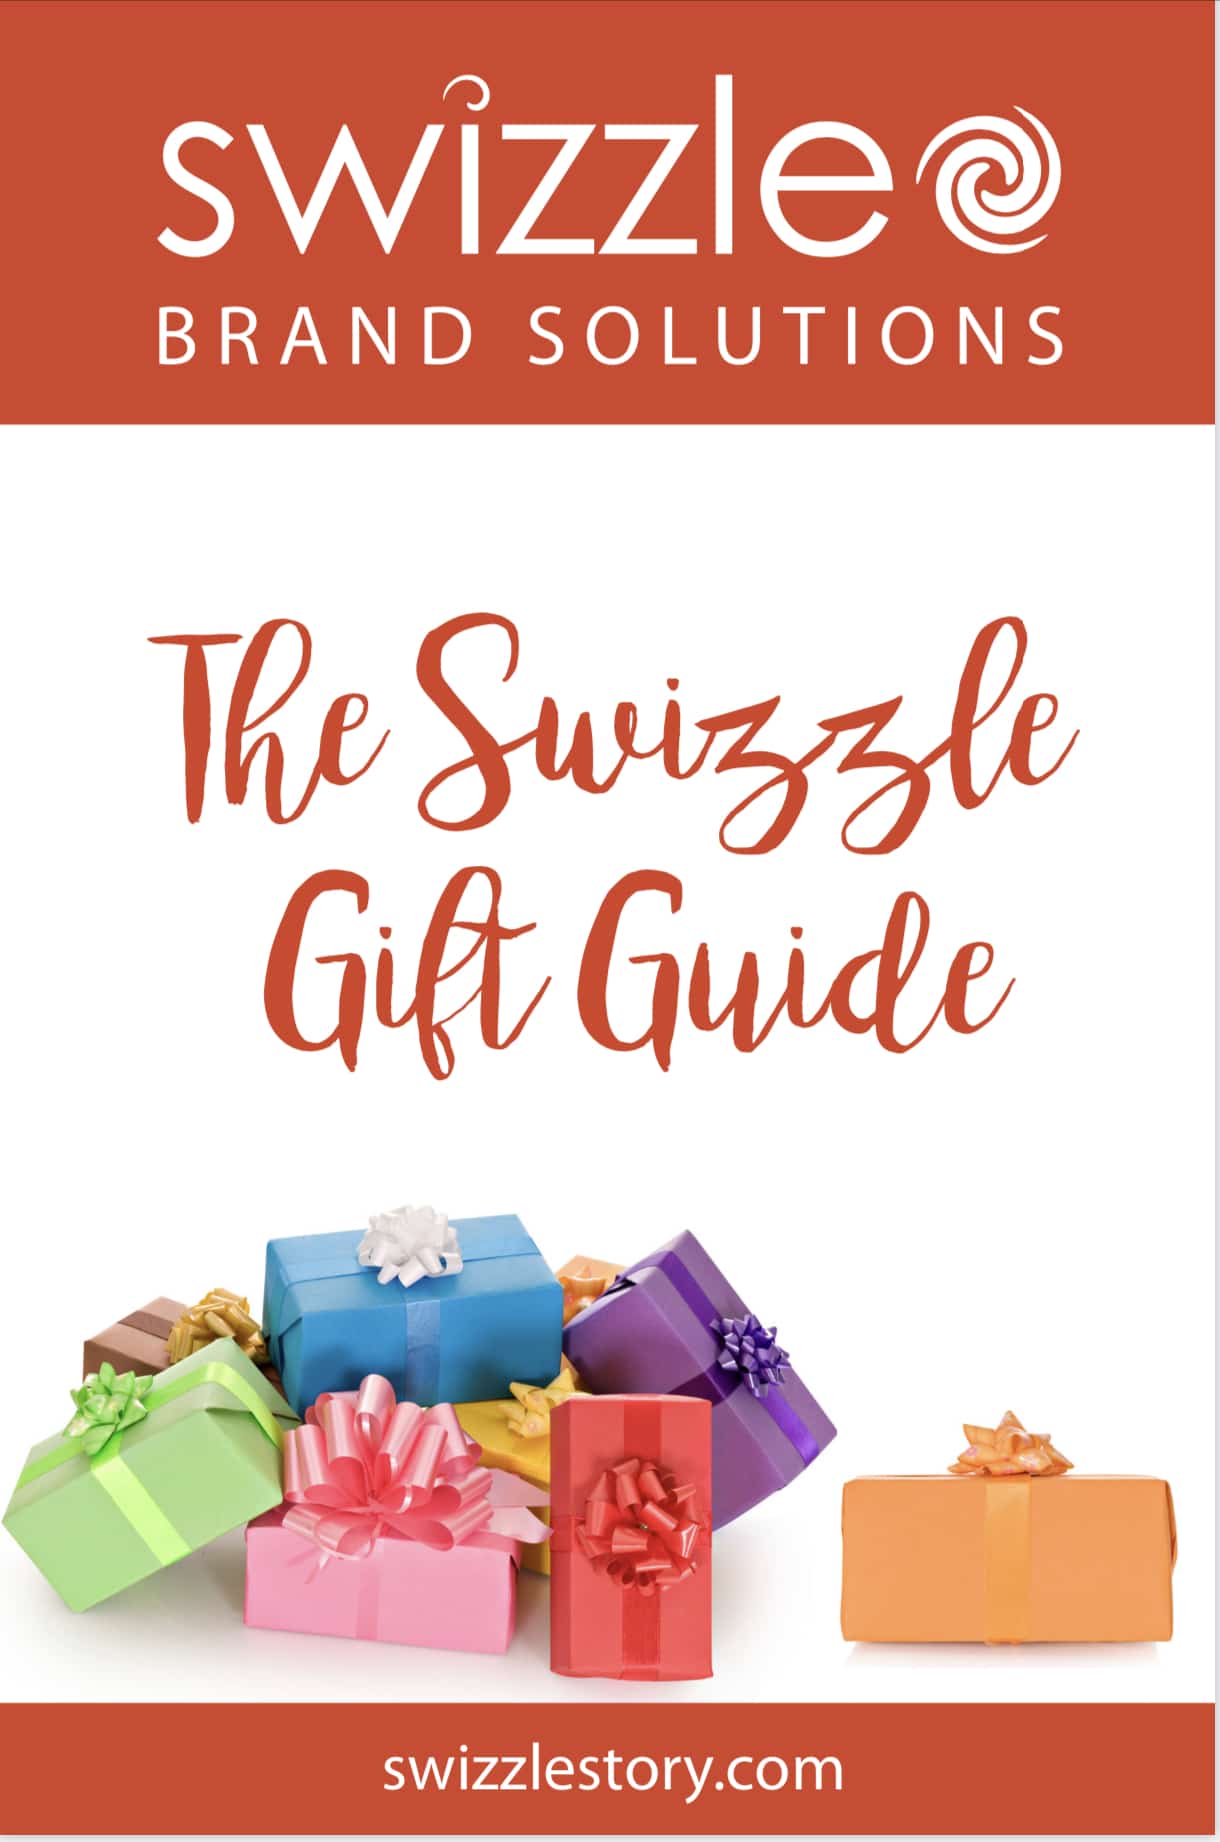 Swizzle 2020 Holiday Gift Guide